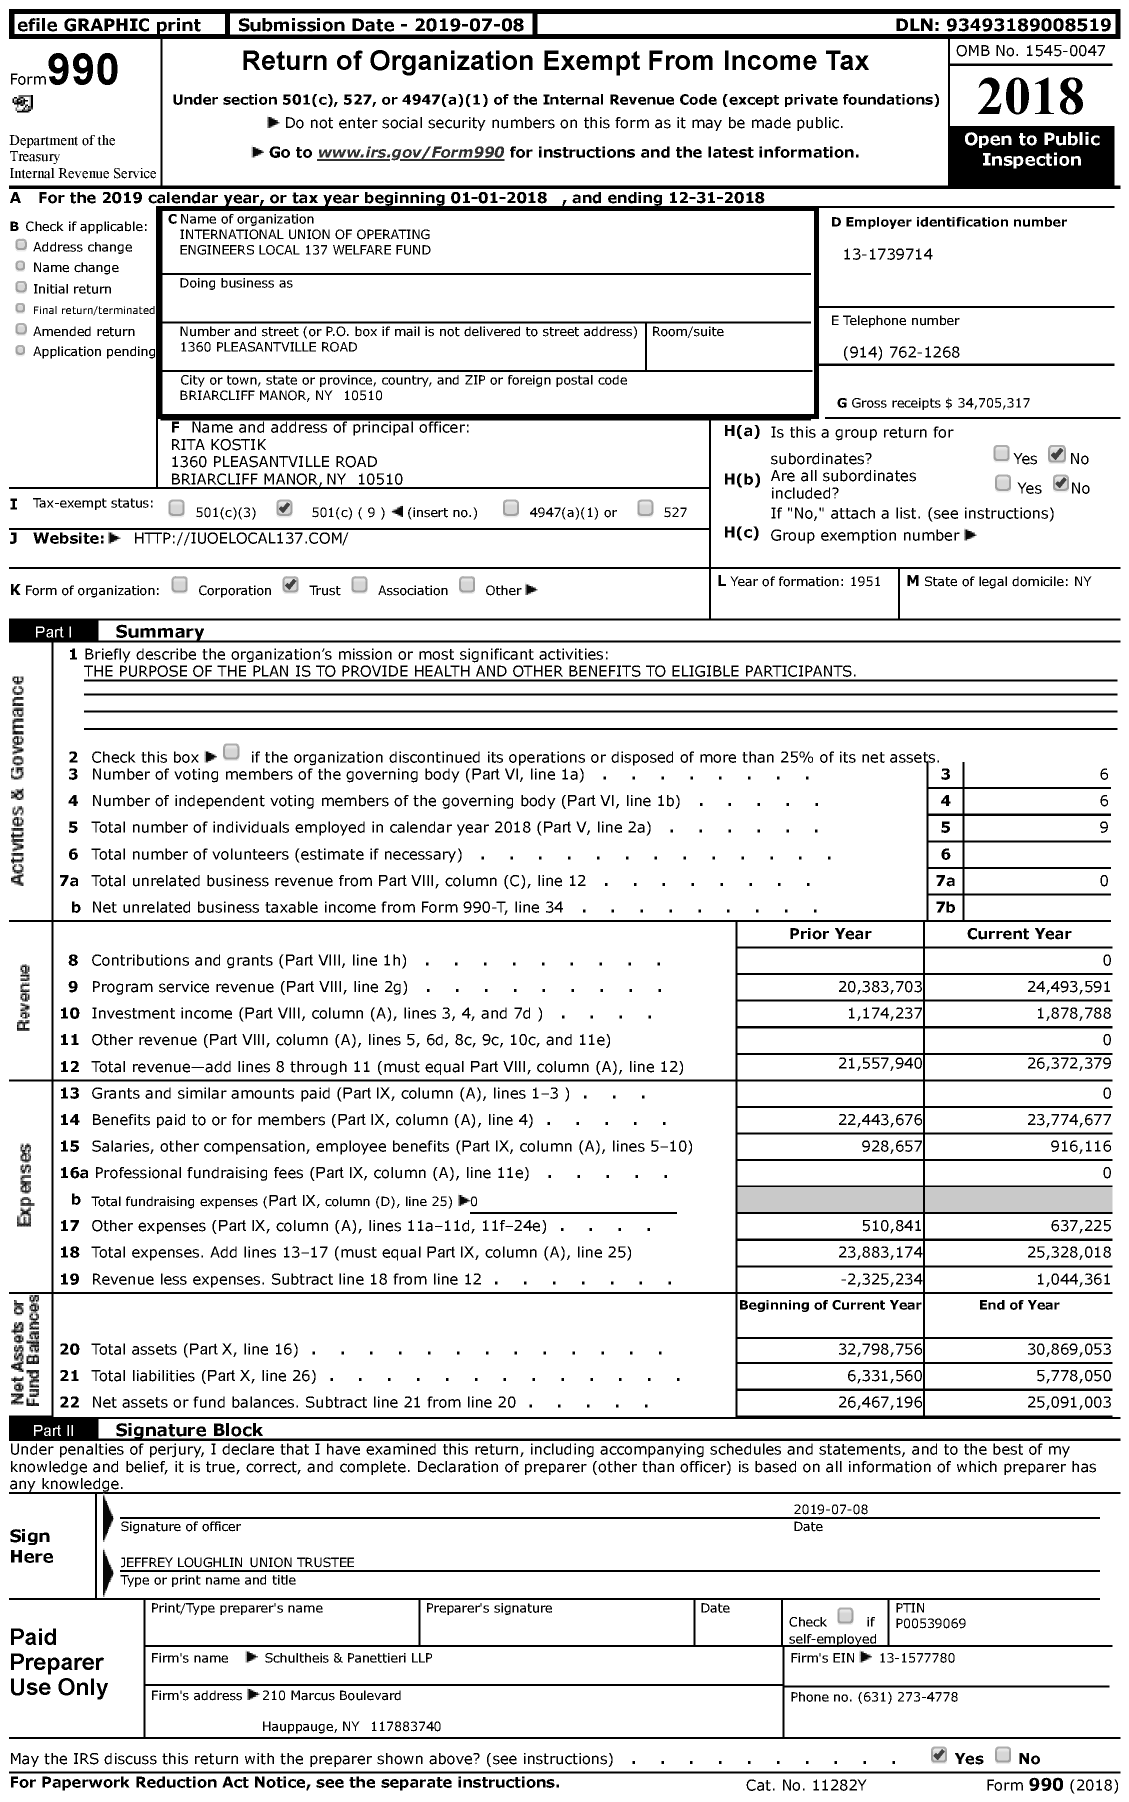 Image of first page of 2018 Form 990 for International Union of Operating Engineers Local 137 Welfare Fund